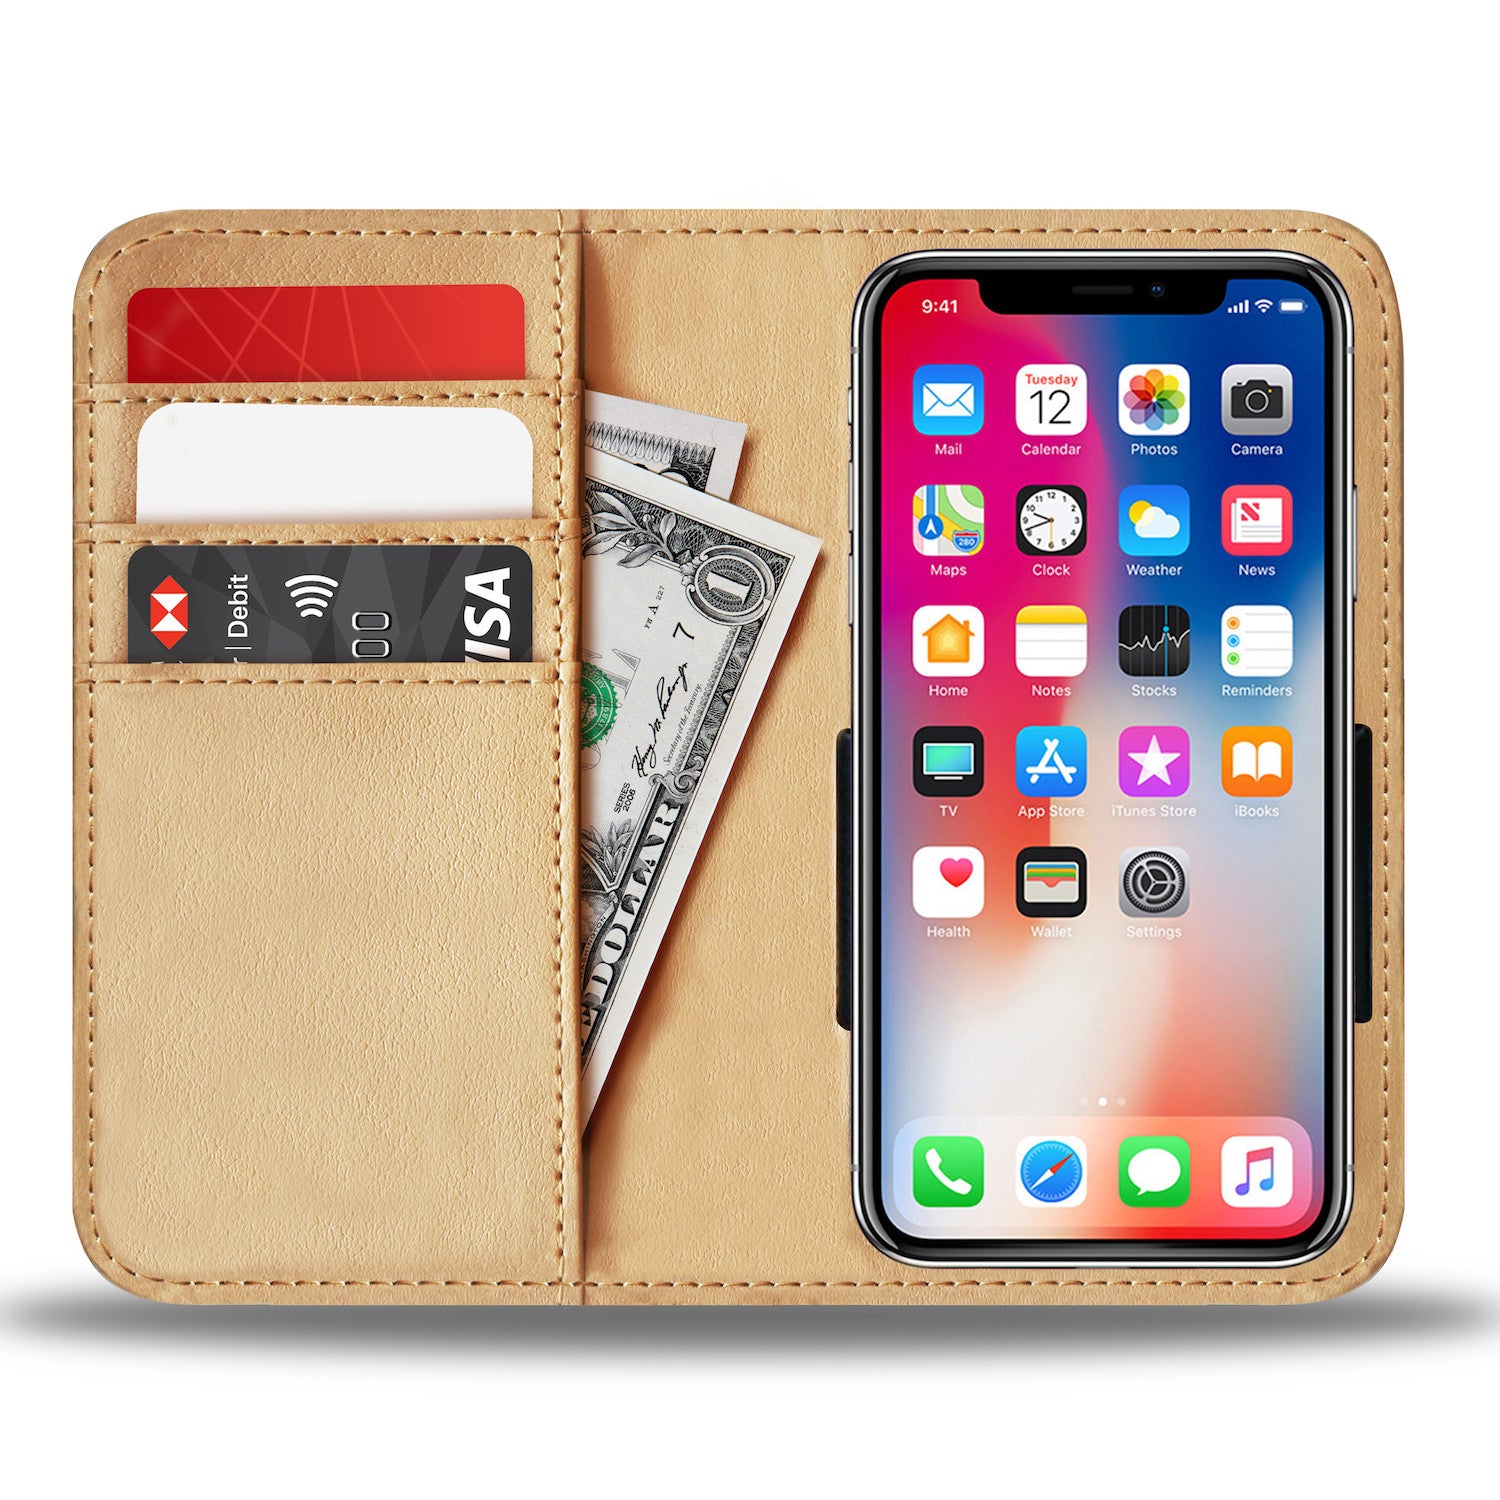 Western iPhone 4 Case/Wallet with Red Heart & Blue Wing – Wild West Living